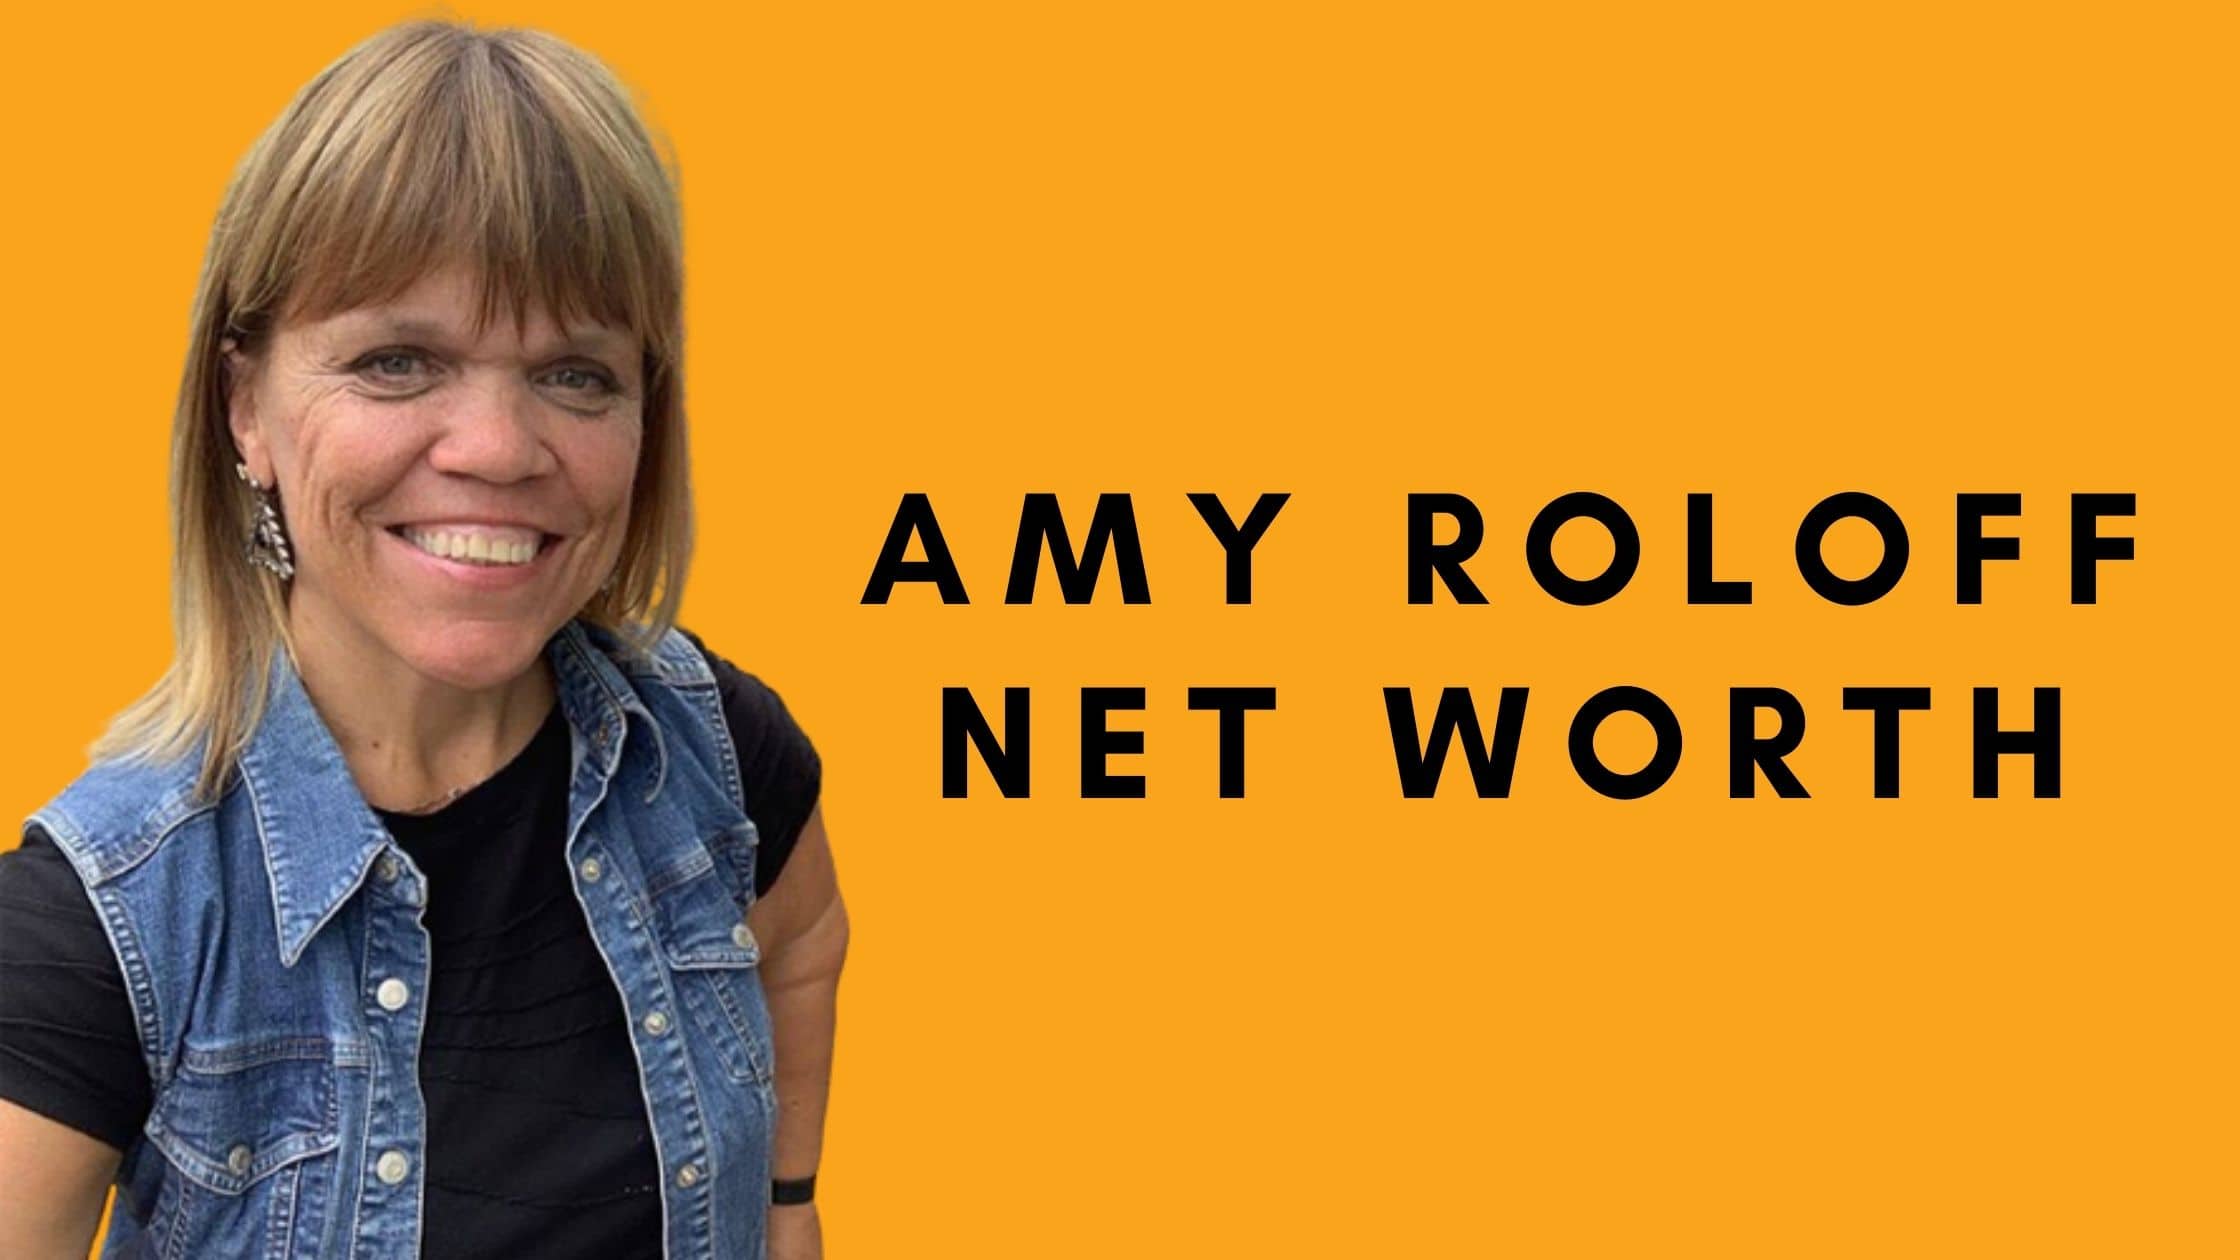 Amy Roloff Net Worth – The Tiny One With Big Dreams